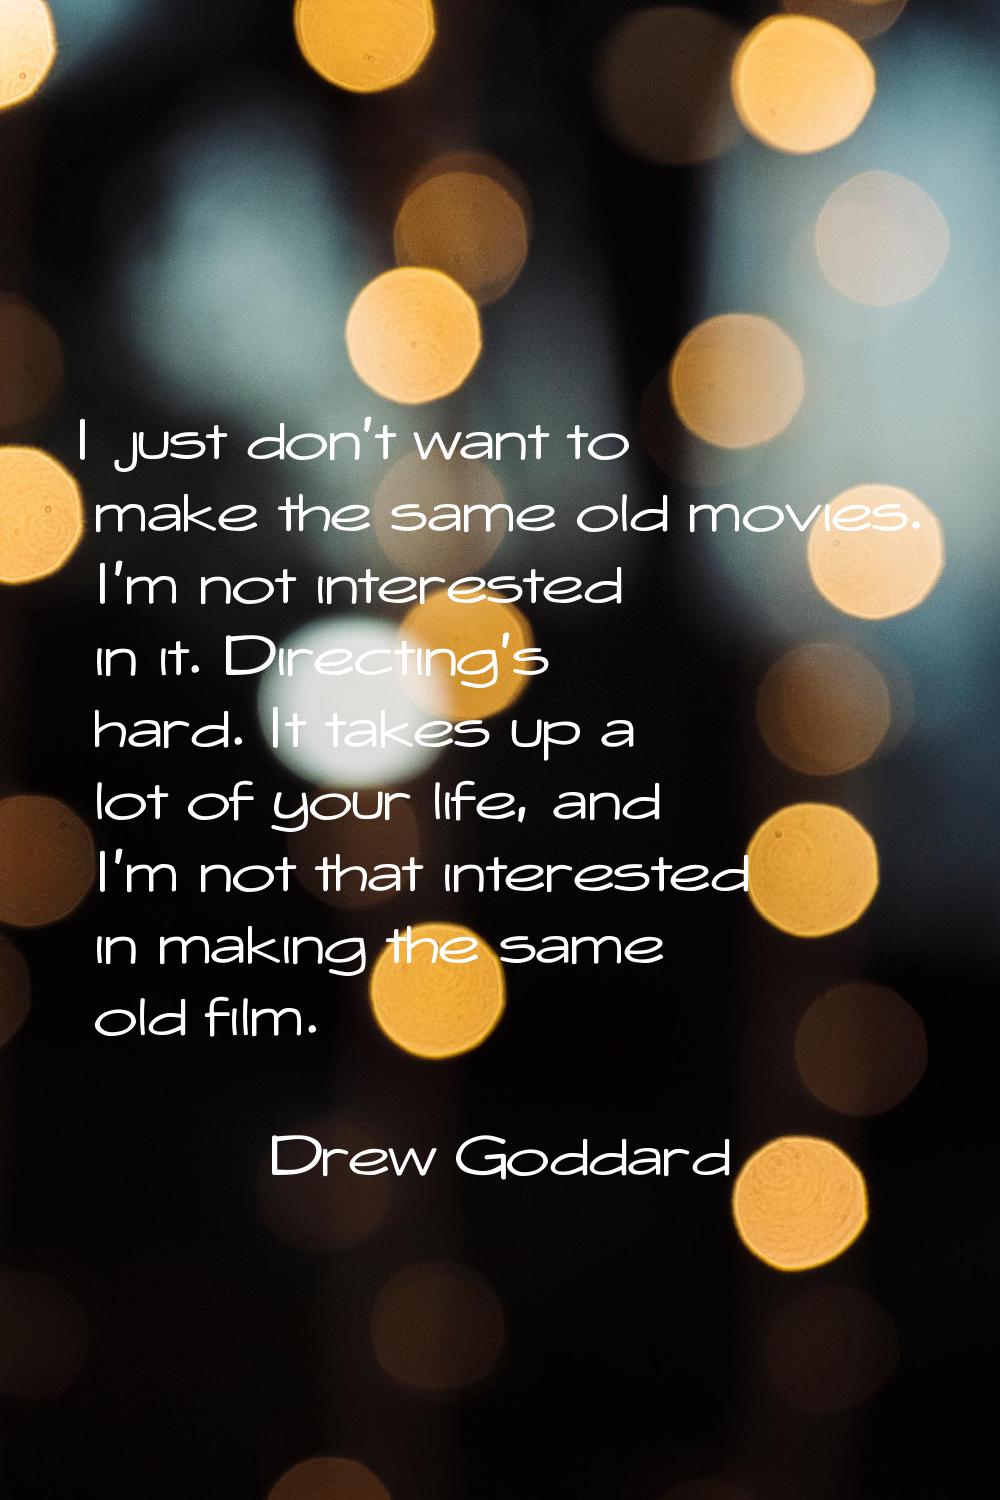 I just don't want to make the same old movies. I'm not interested in it. Directing's hard. It takes